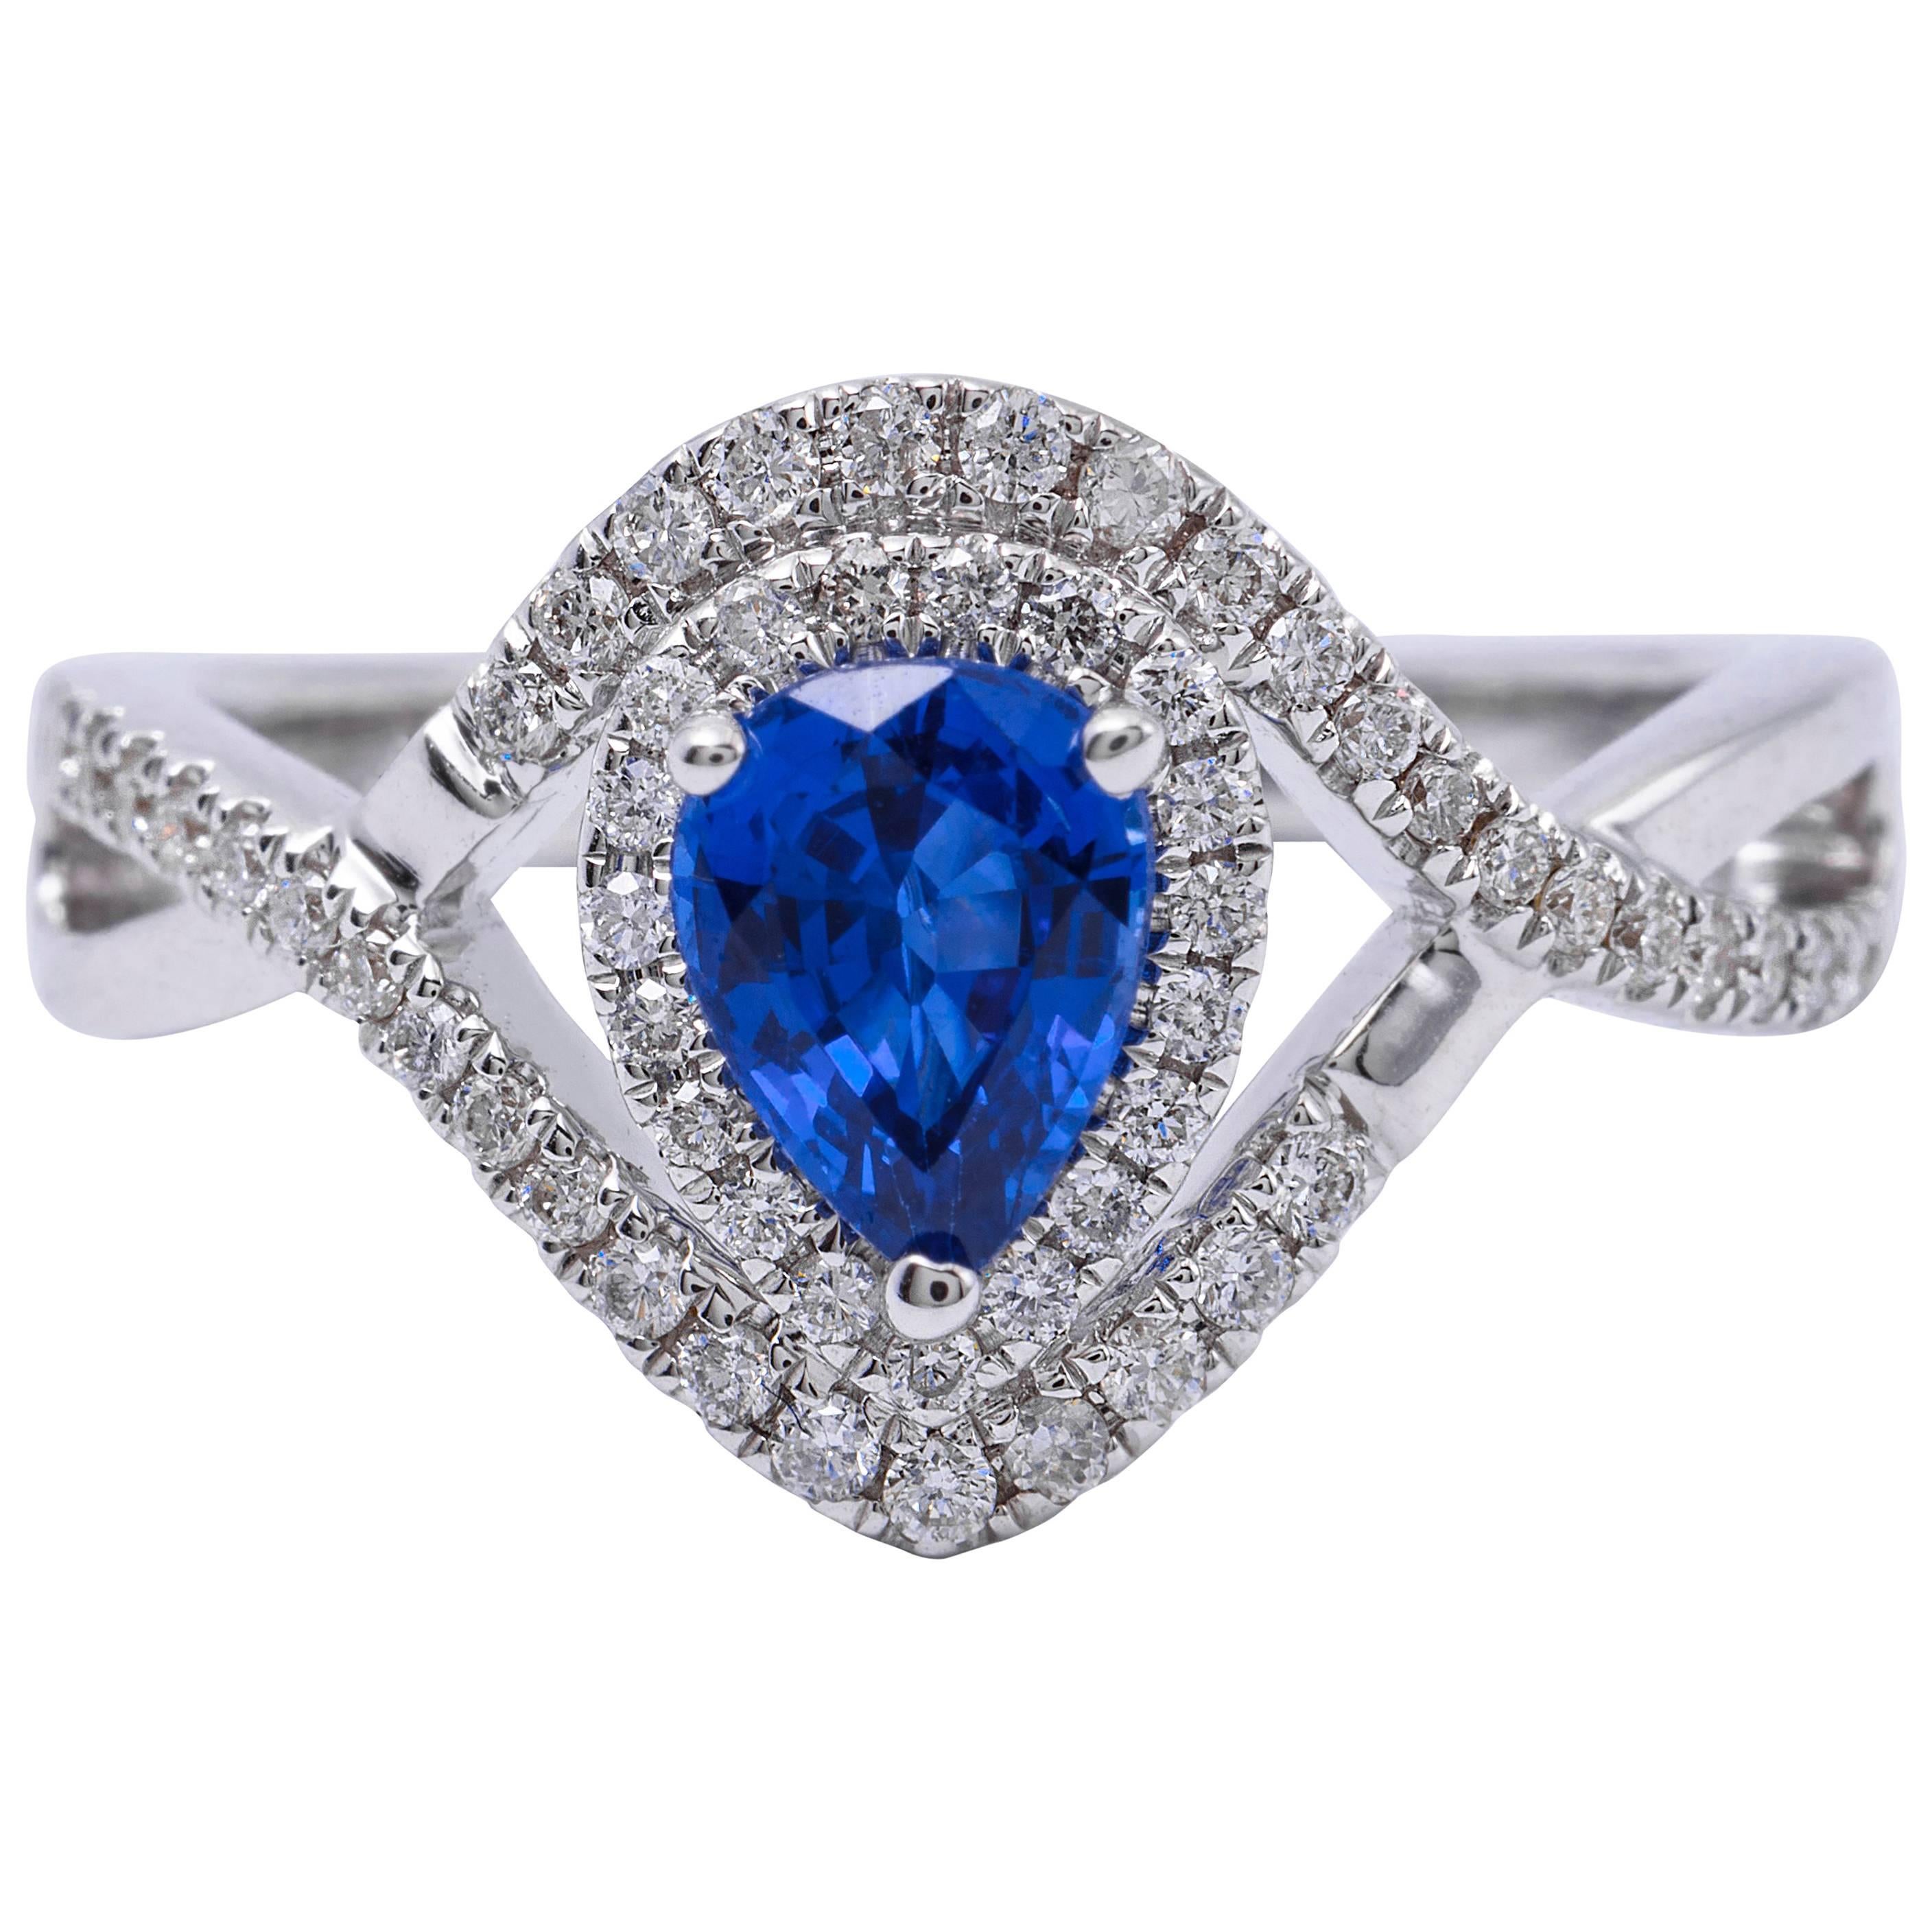 Pear Shape Sapphire Diamond White Gold Engagement Cocktail Ring